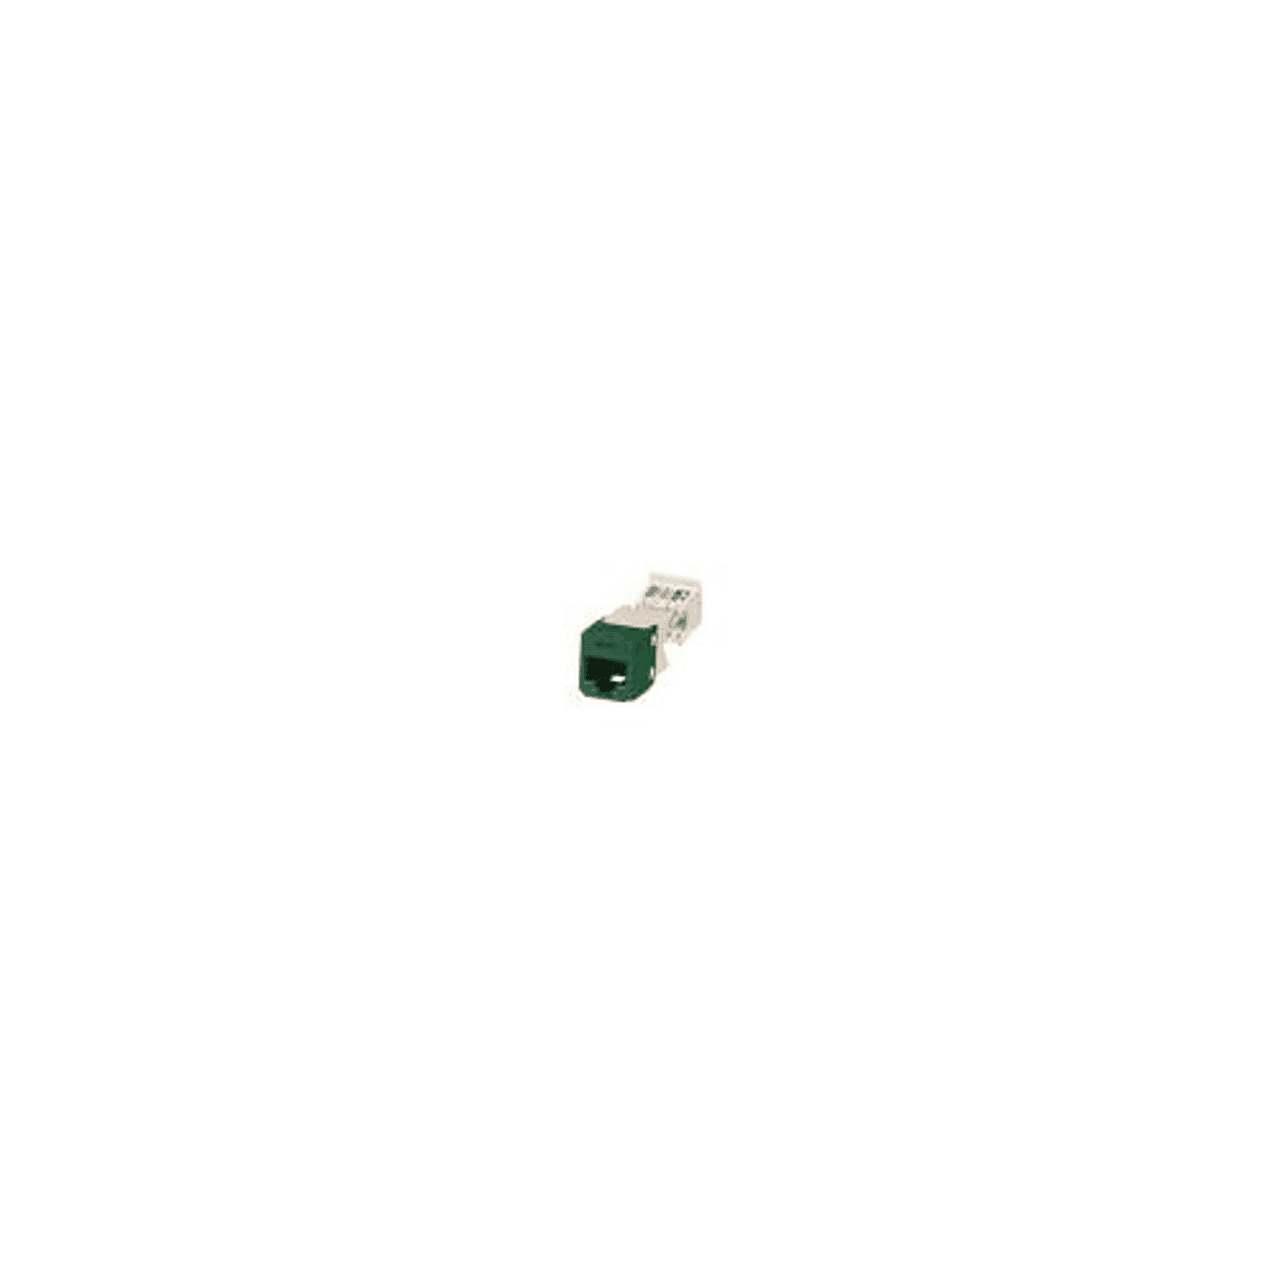 Panduit CJ688TGGR 0.62" x 1.5" x 0.71", Green, Plated Phosphor Bronze Contact, ABS, 8-Position 8-Wire RJ45, T568A/T568B/Universal Wiring, Category 6